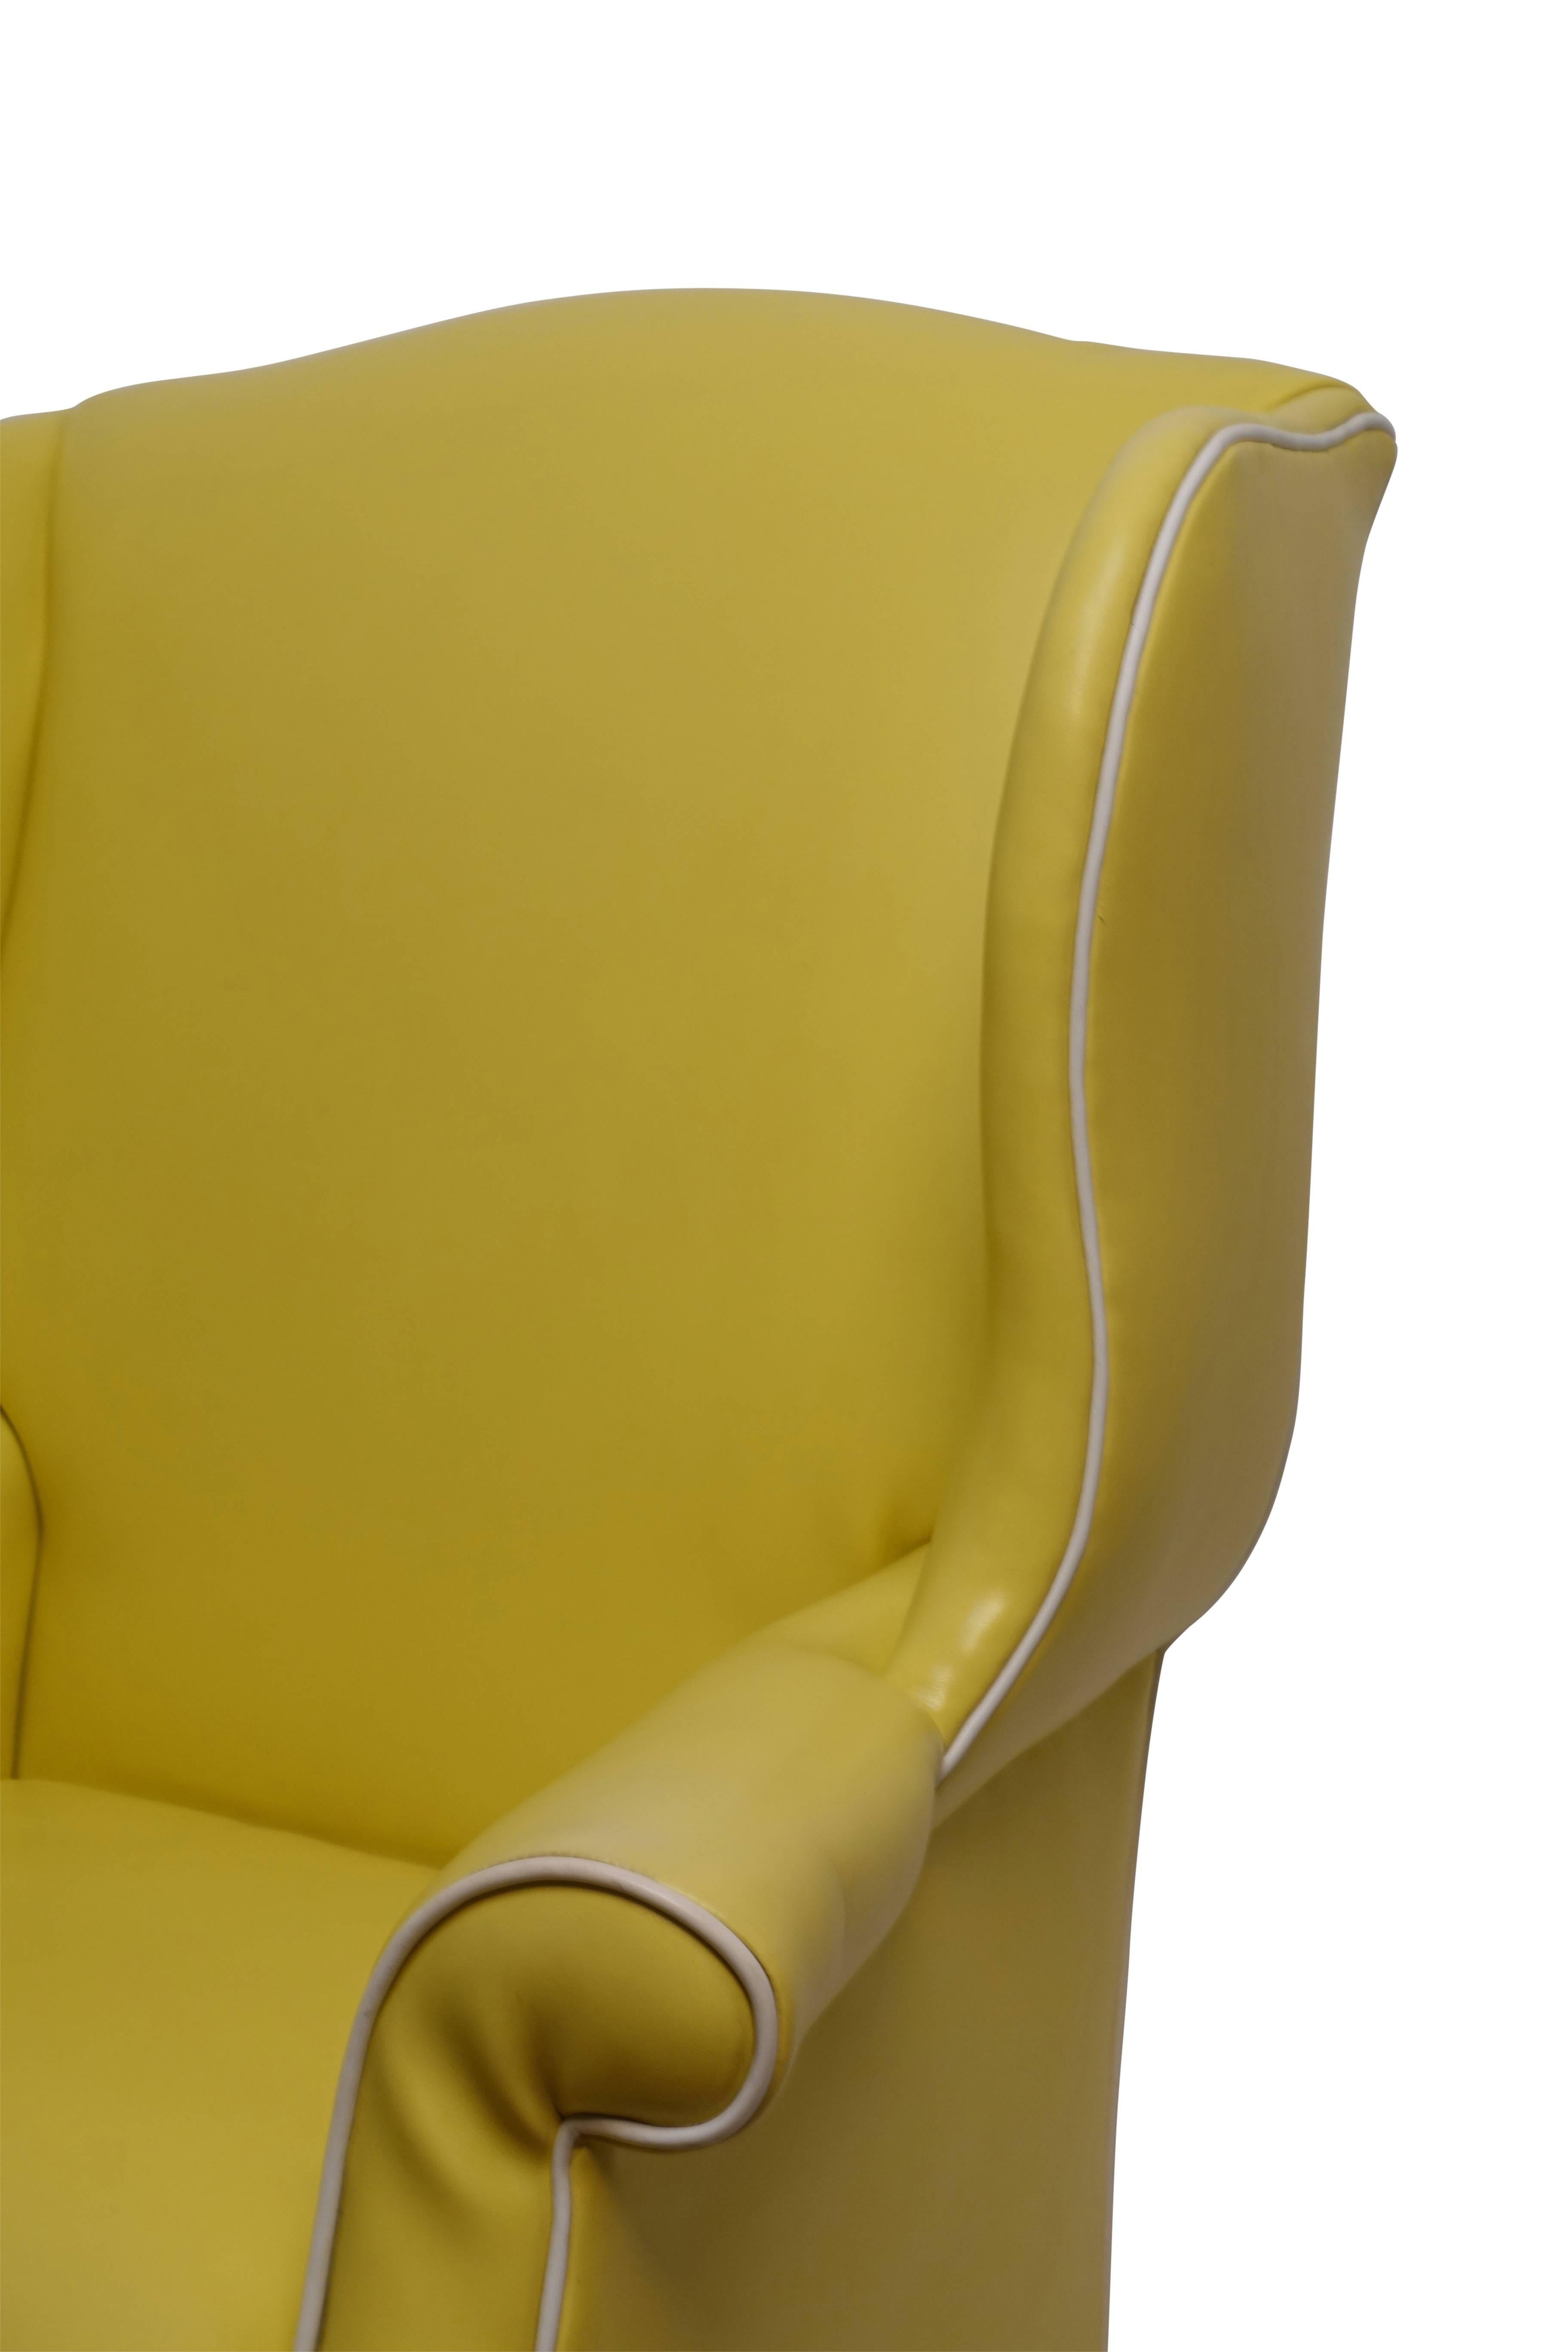 20th Century Pair of Georgian Style Yellow Vinyl Wingback Chairs with Piping Detail, 1960s